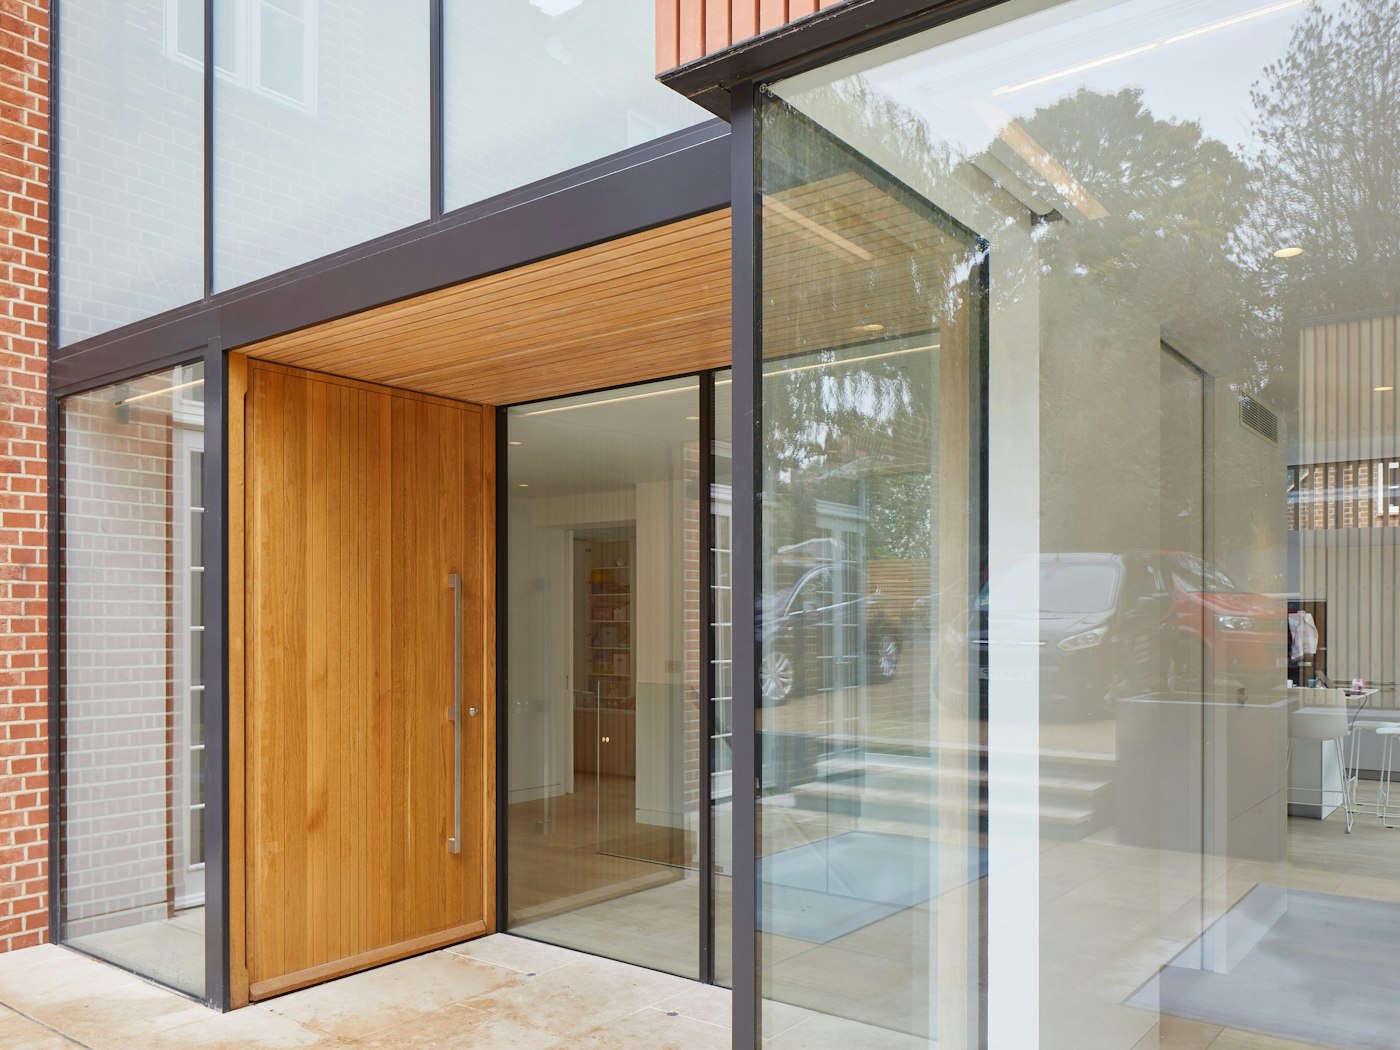 The unusual placement of the door in the facade also adds to the contemporary style